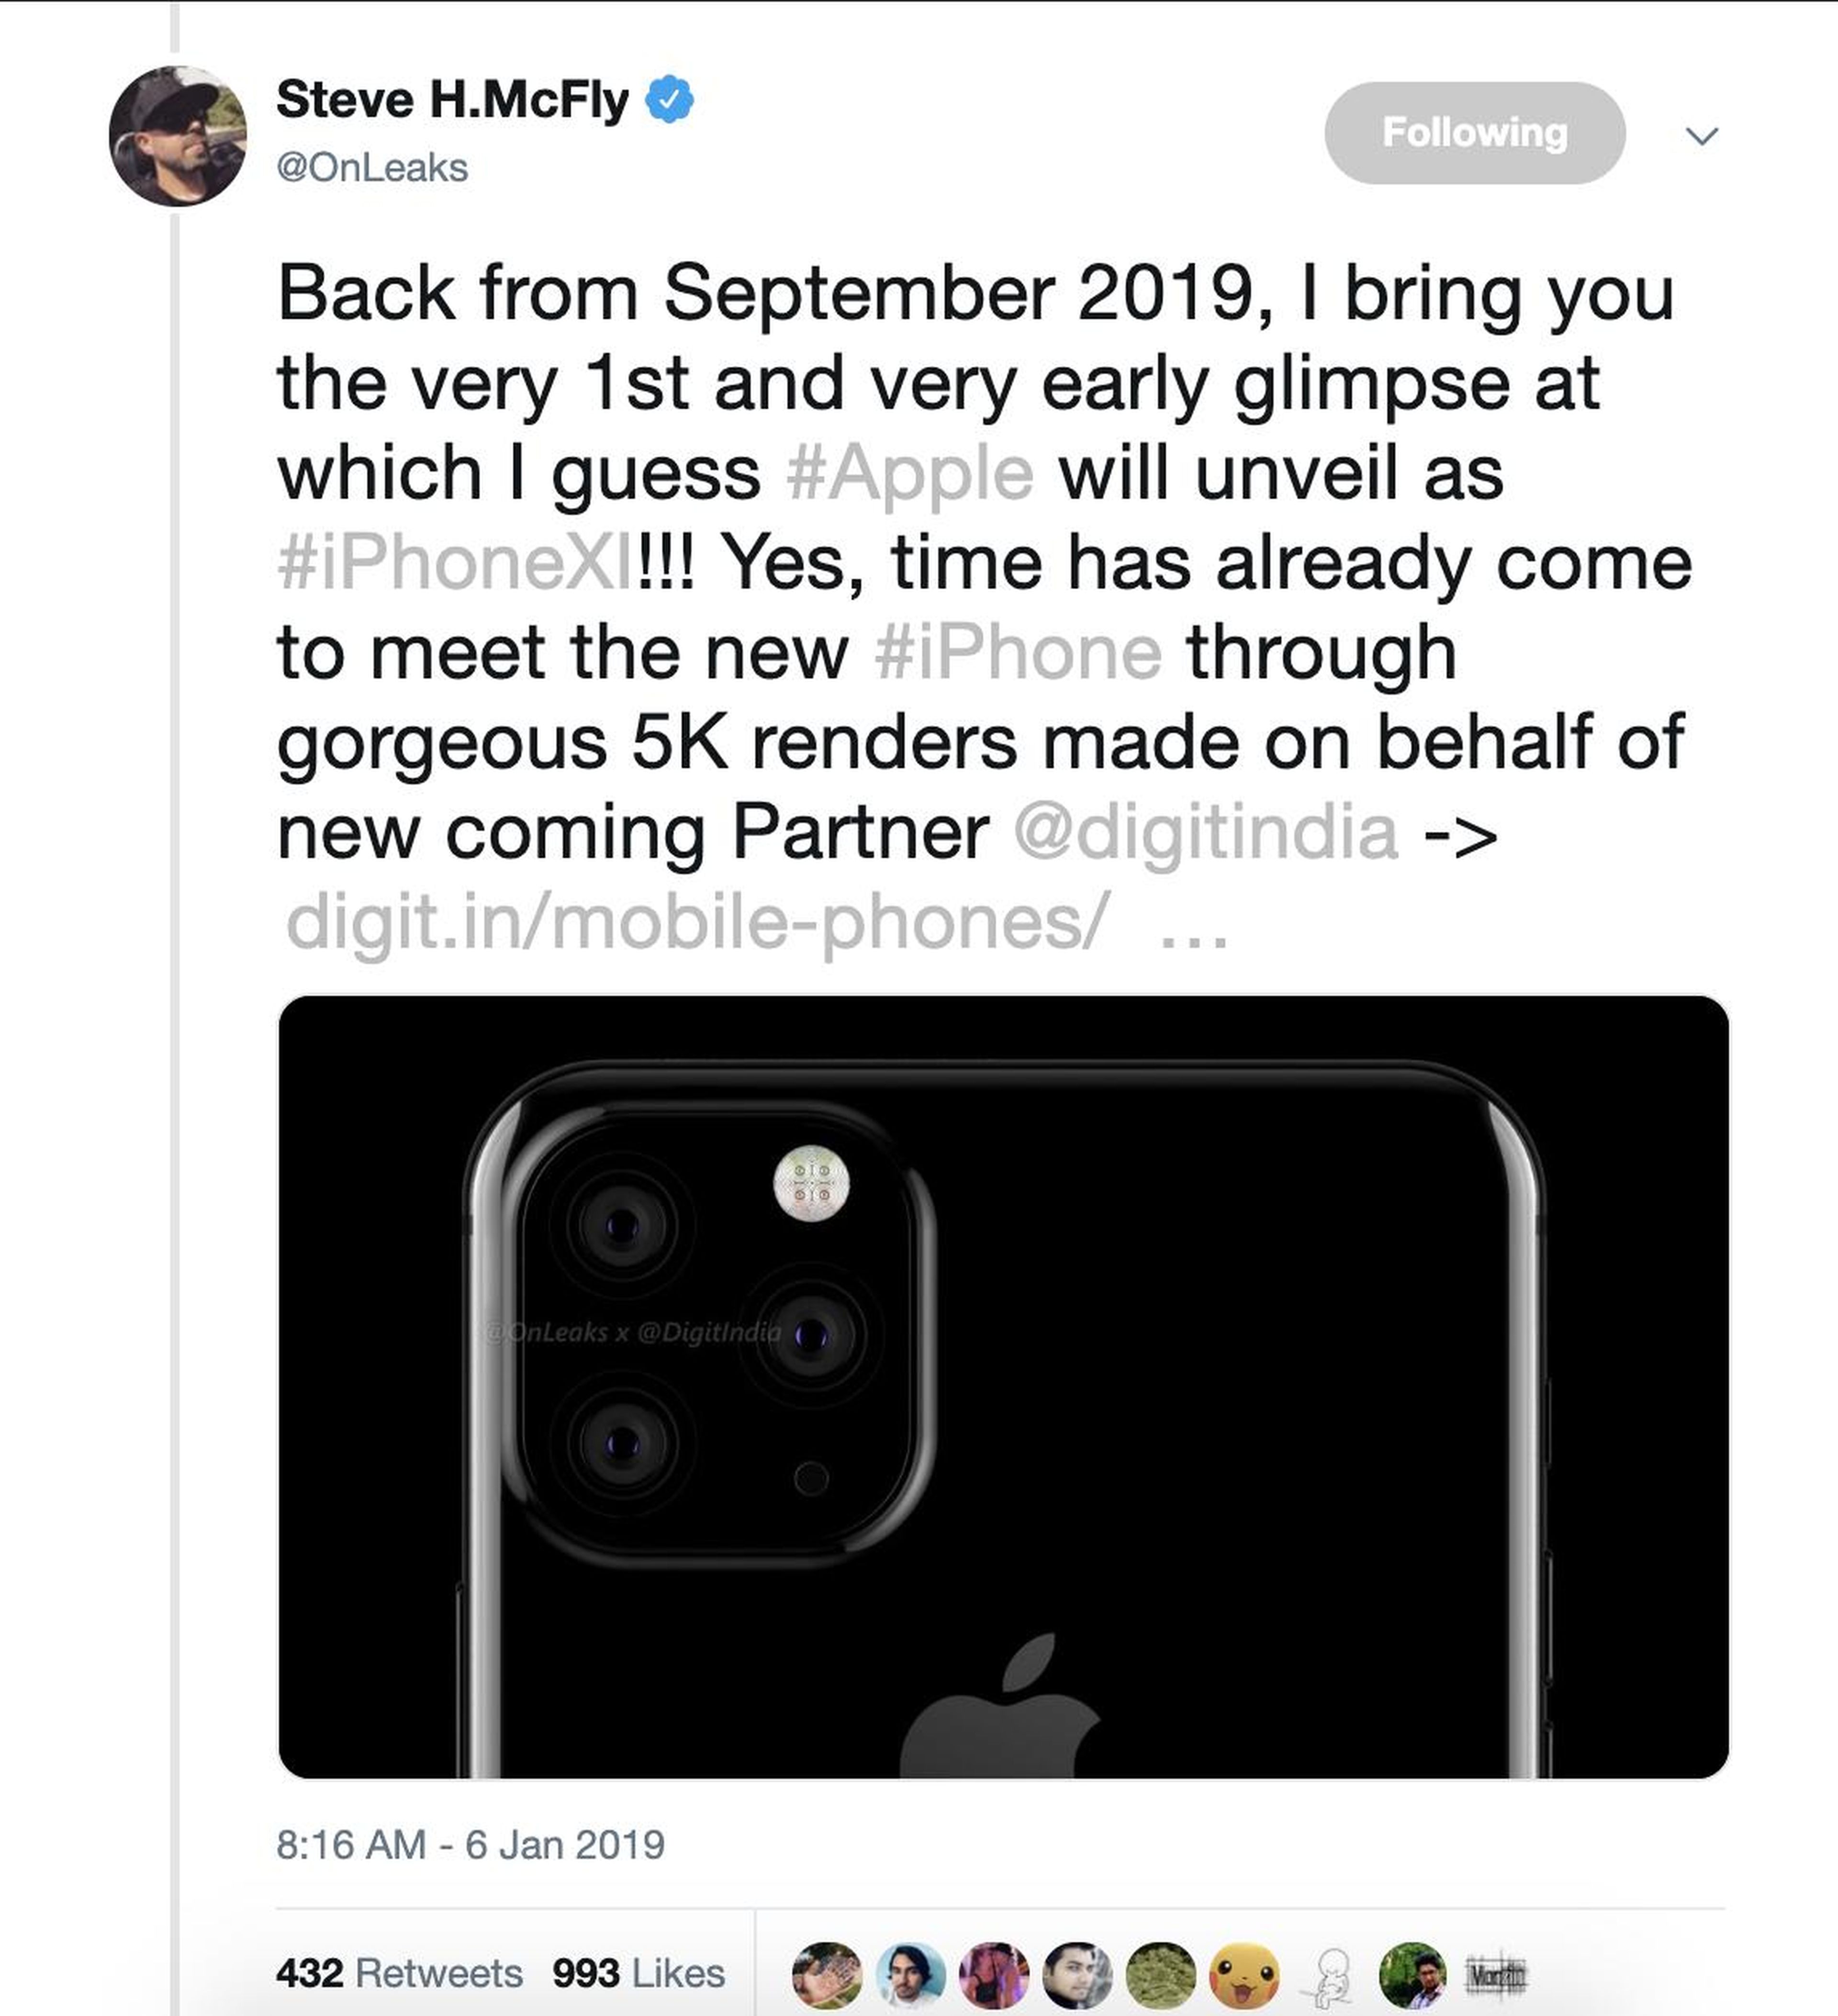 Hilsenteger's iPhone 11 dummy looks almost identical to a rendering from Hemmerstoffer published in January, based on rumors and leaked schematics.